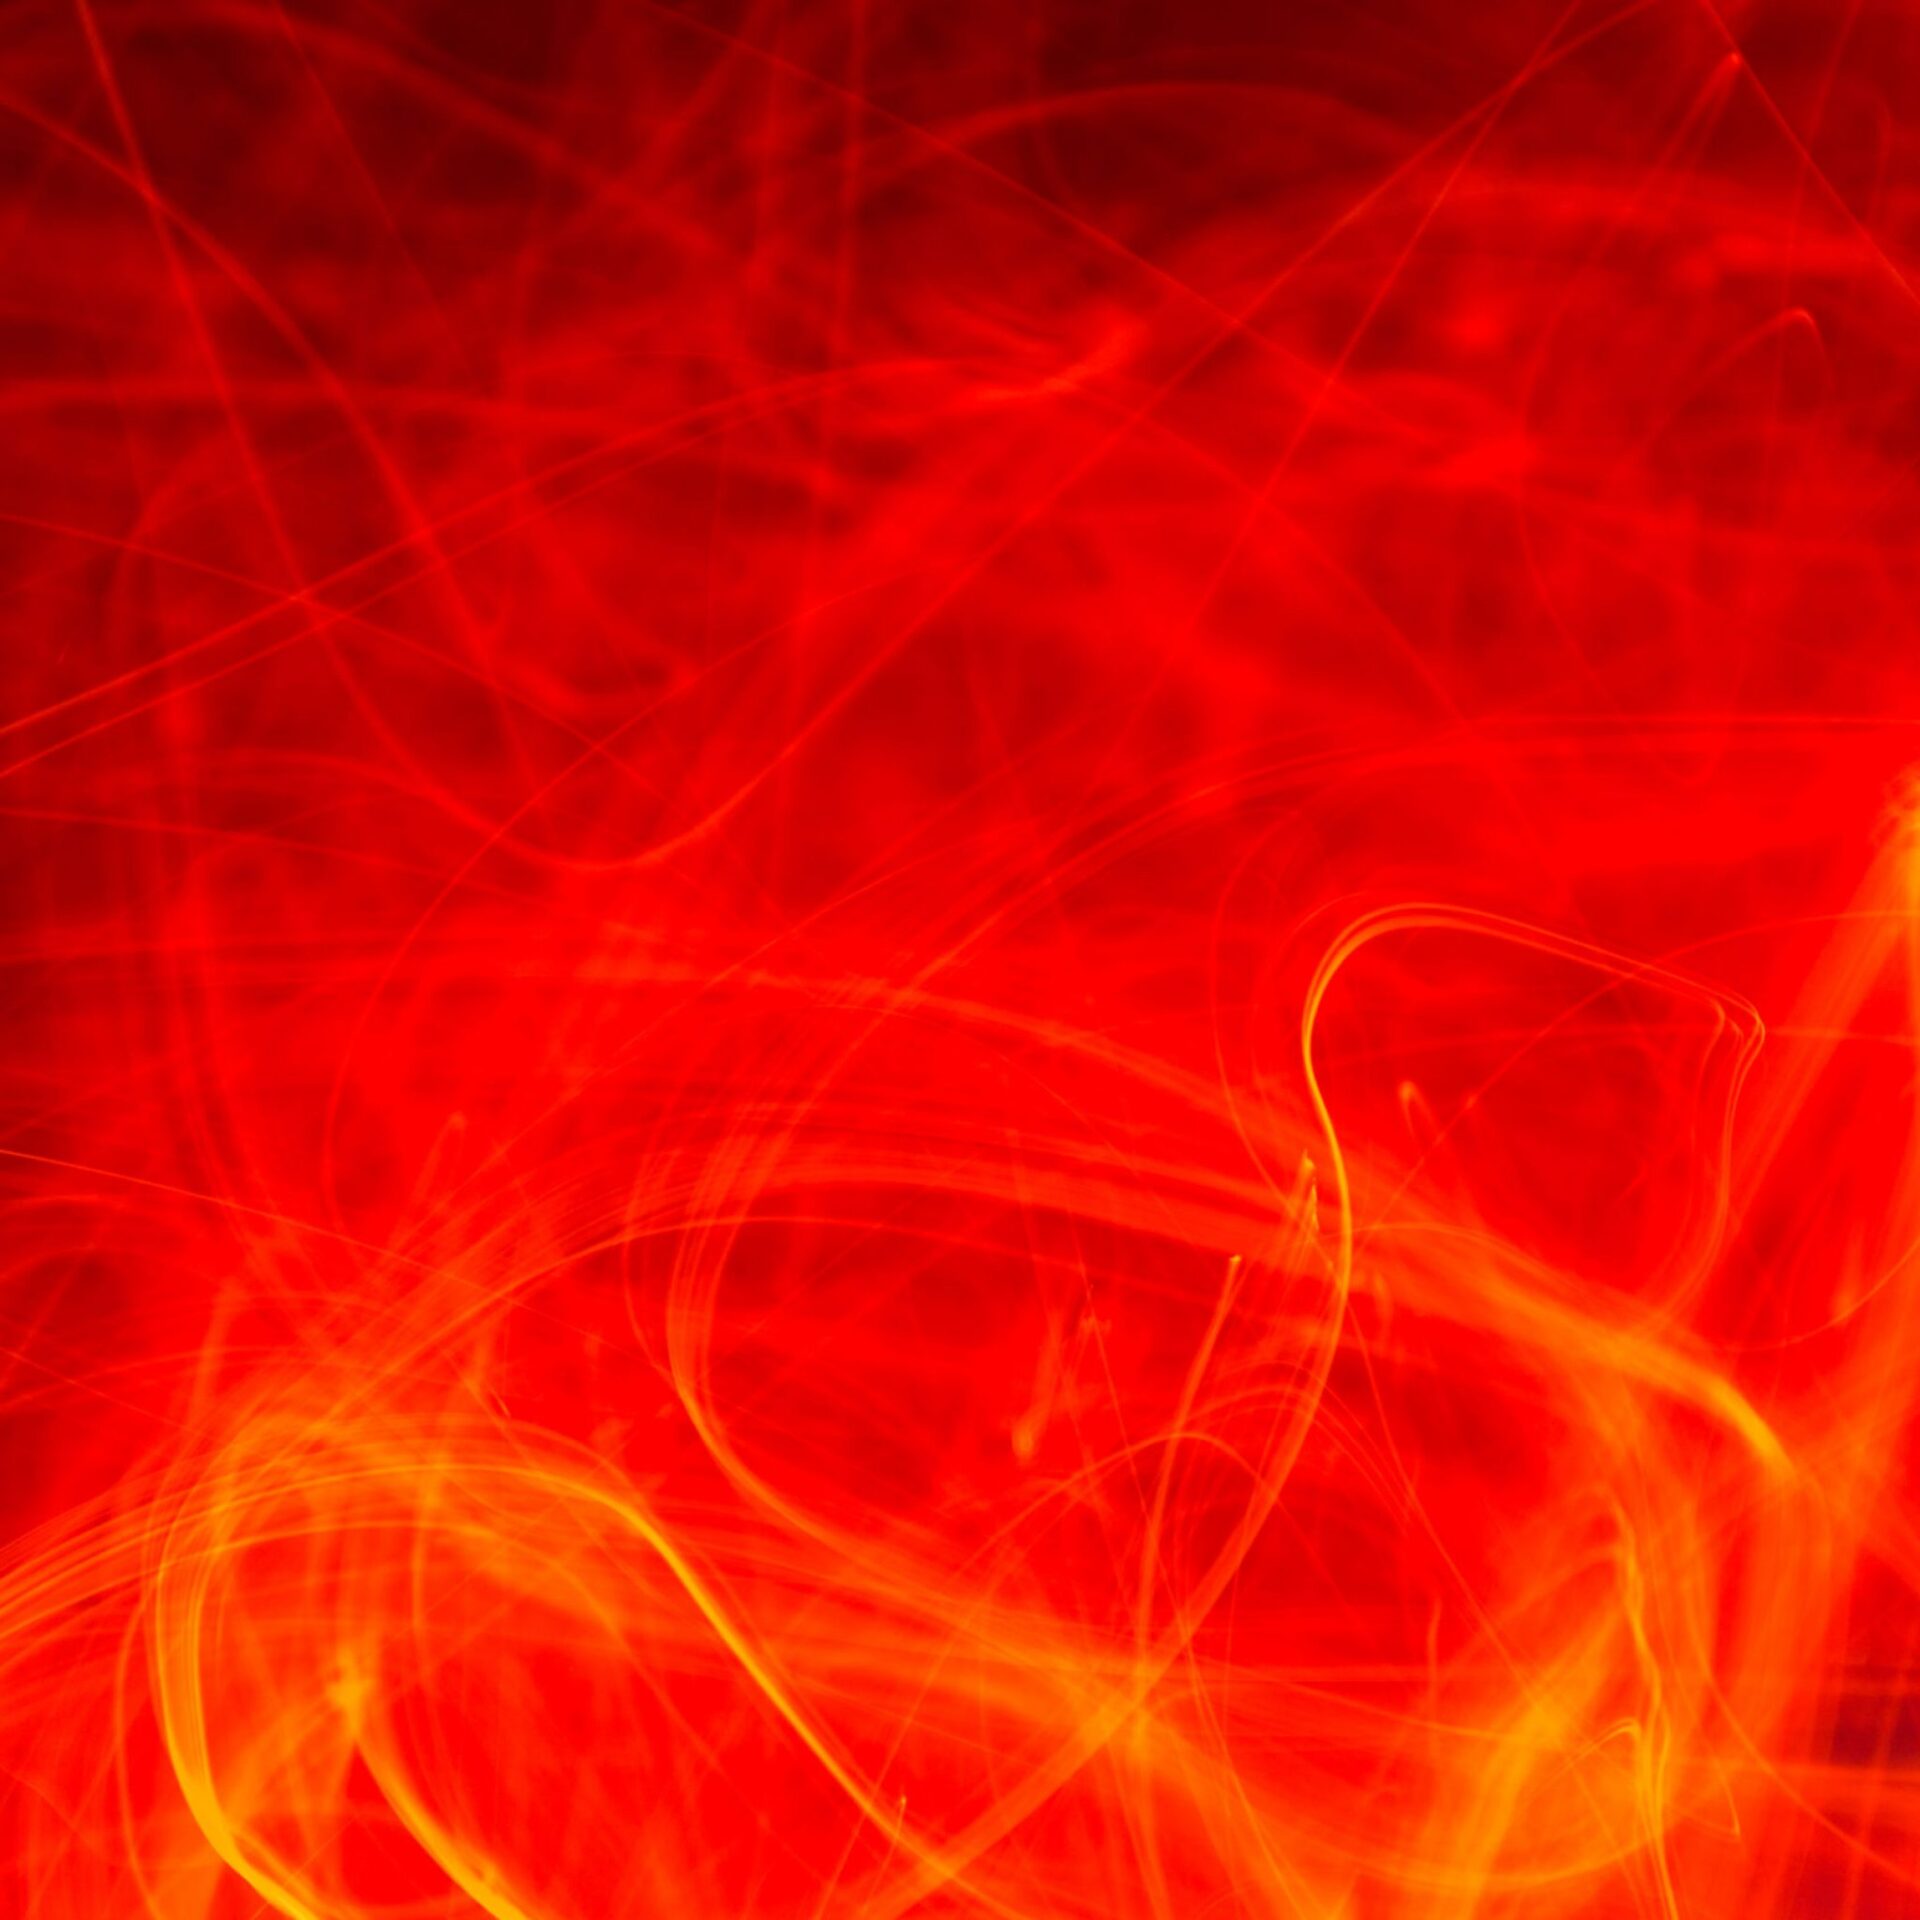 26465045 - blazing fire flames texture/background